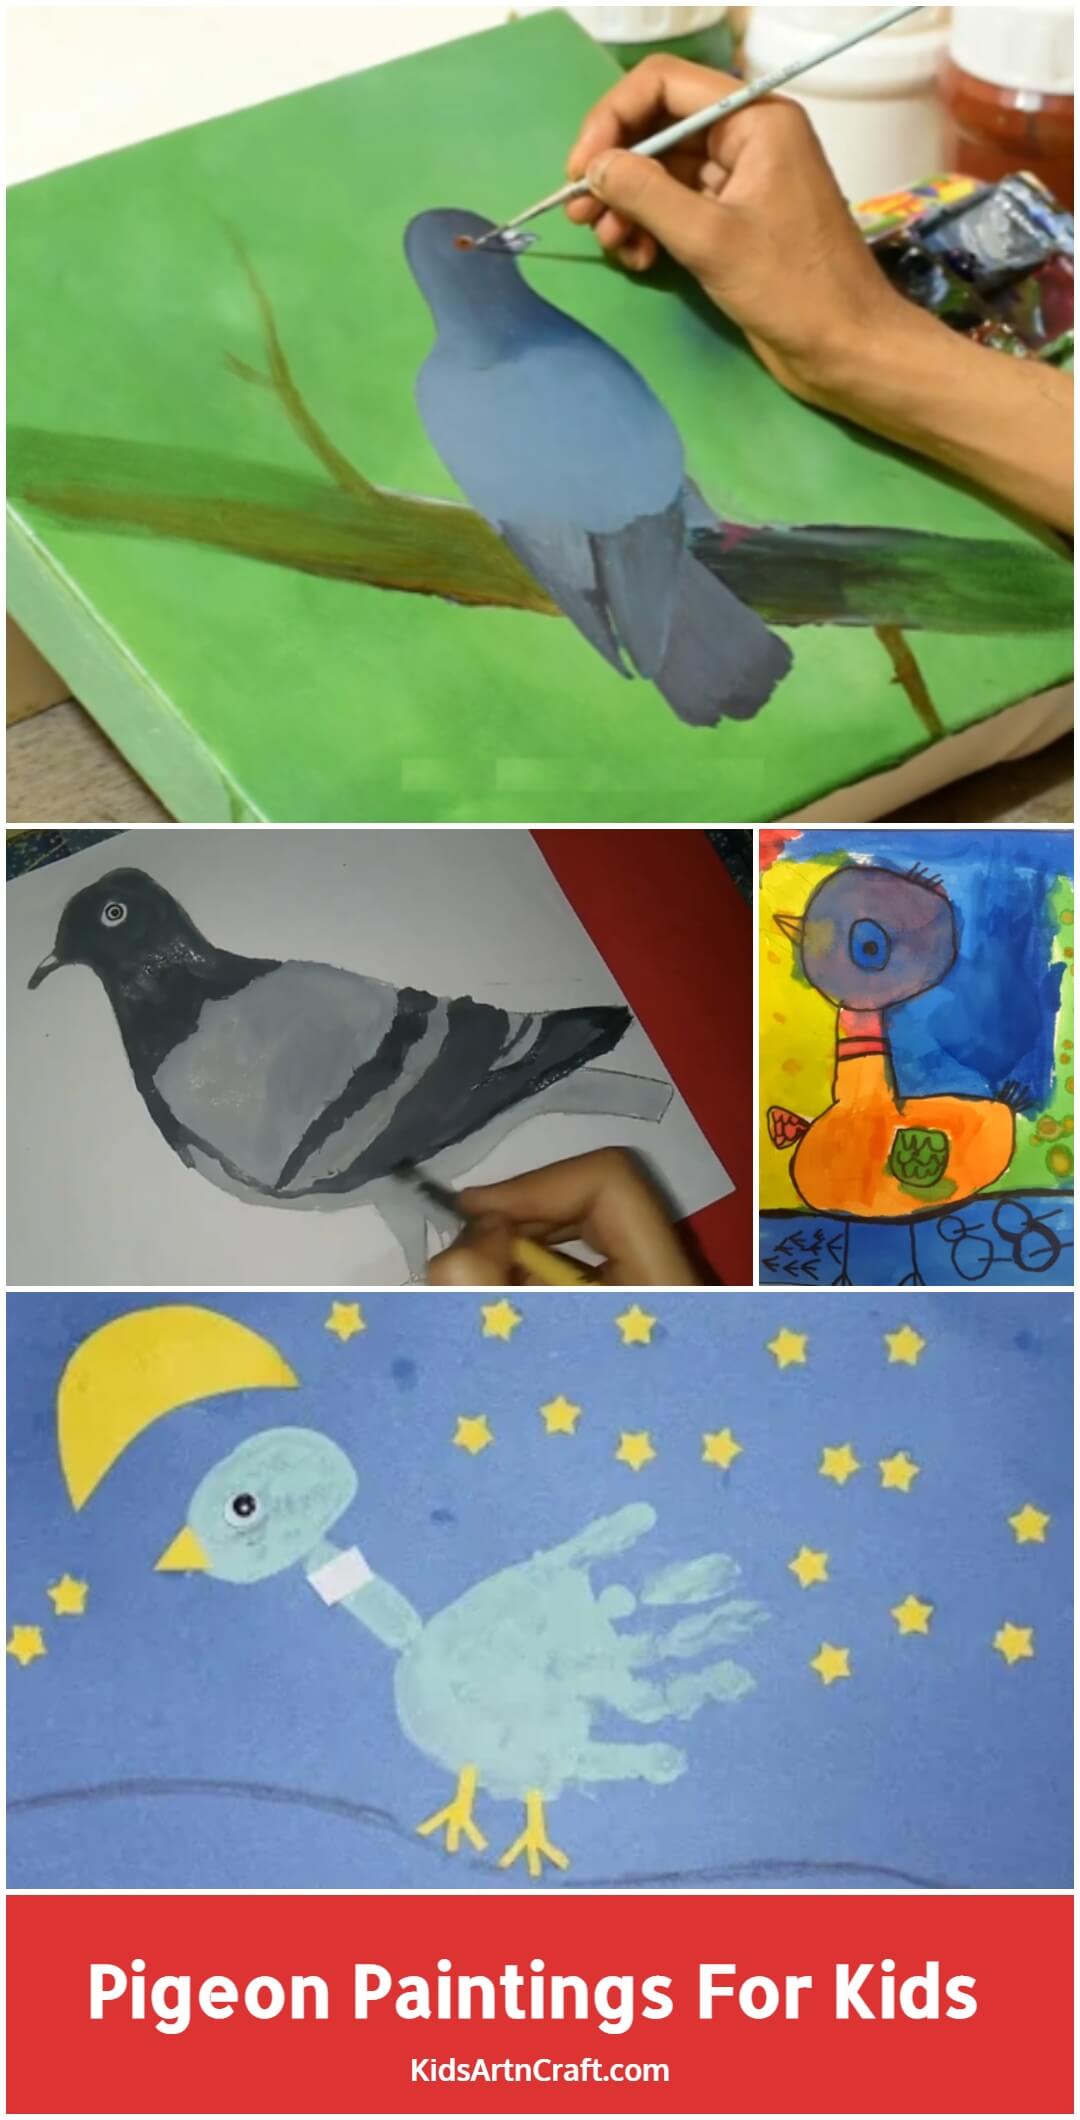 Pigeon Paintings For Kids